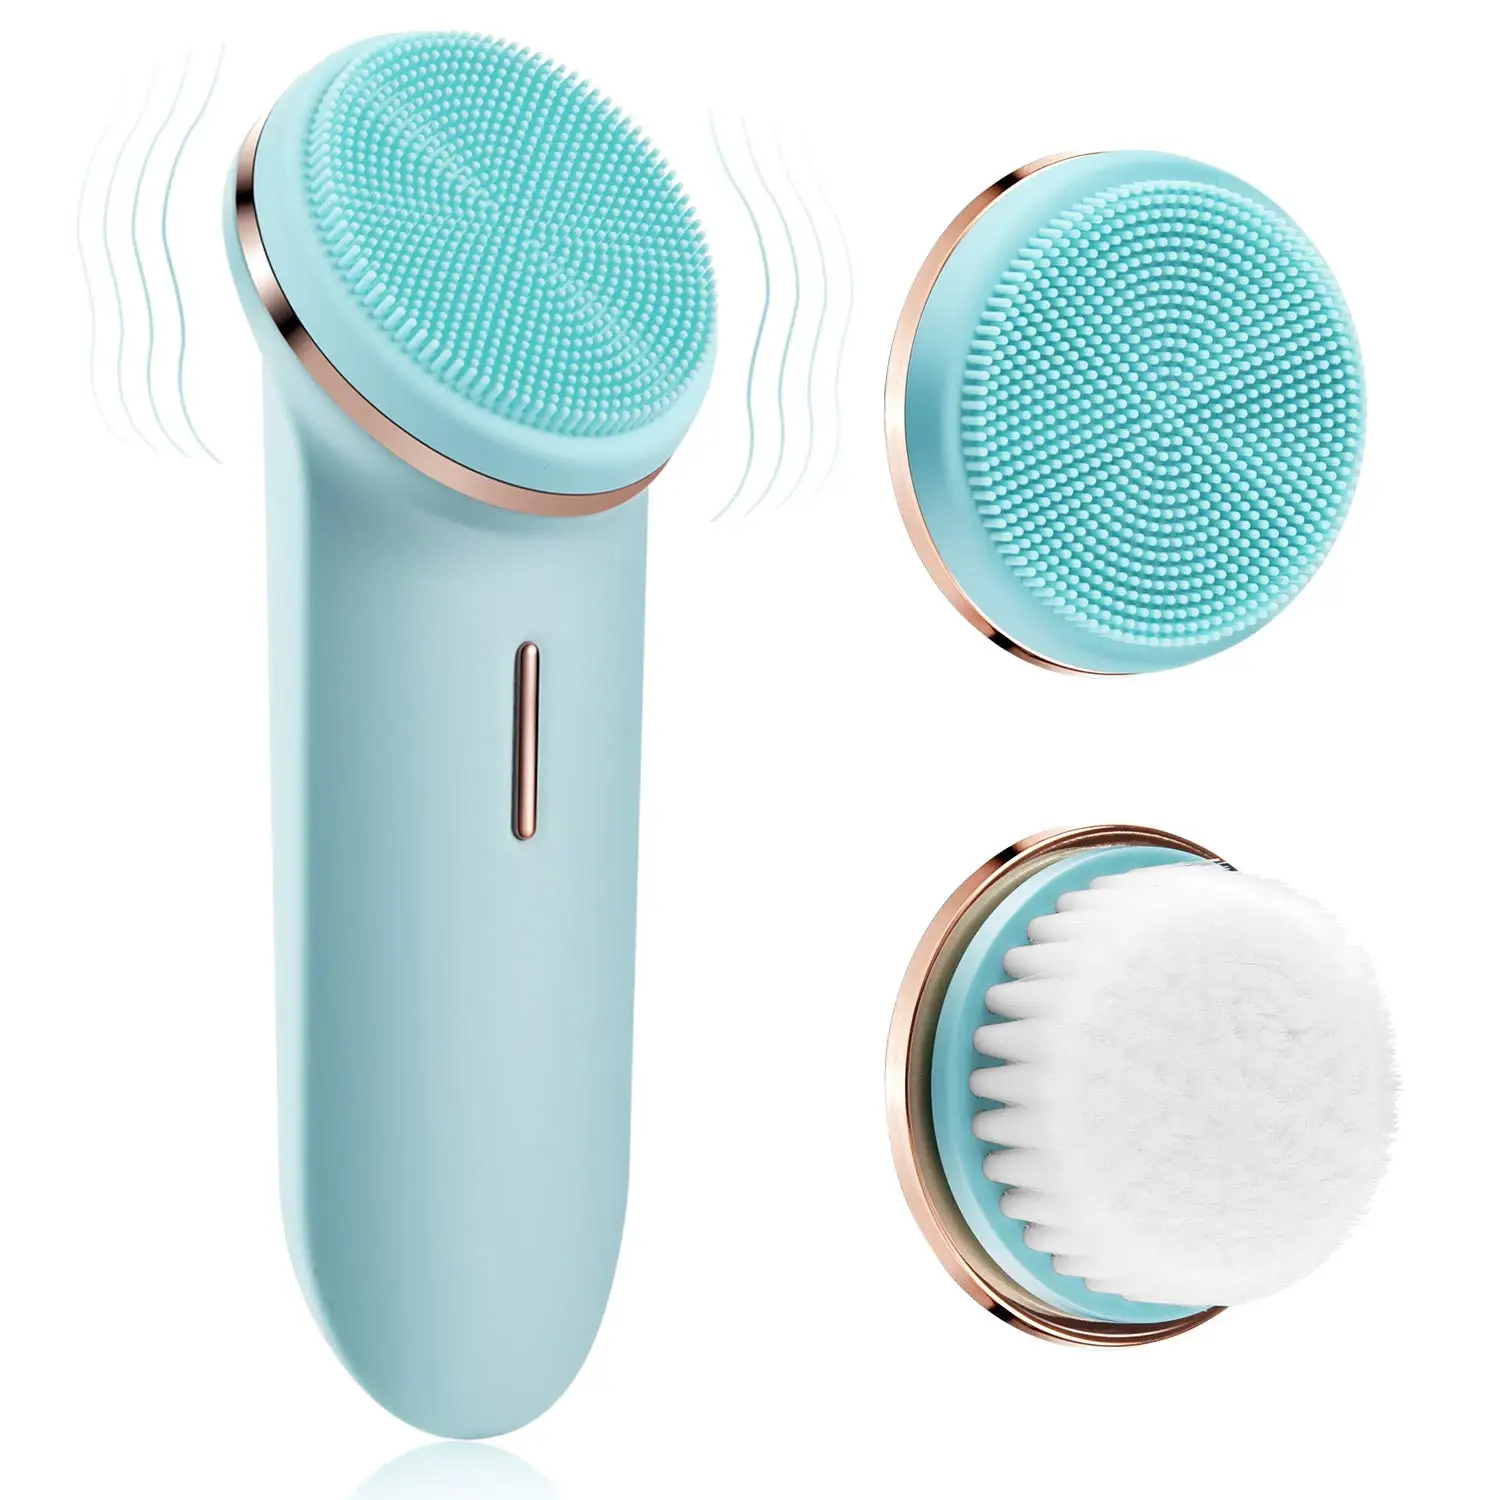 

Silicone Face Cleanser Sonic Face Scrubbers IPX7 Waterproof Electric Facial Cleansing Brush For Deep Cleansing, Green/pink